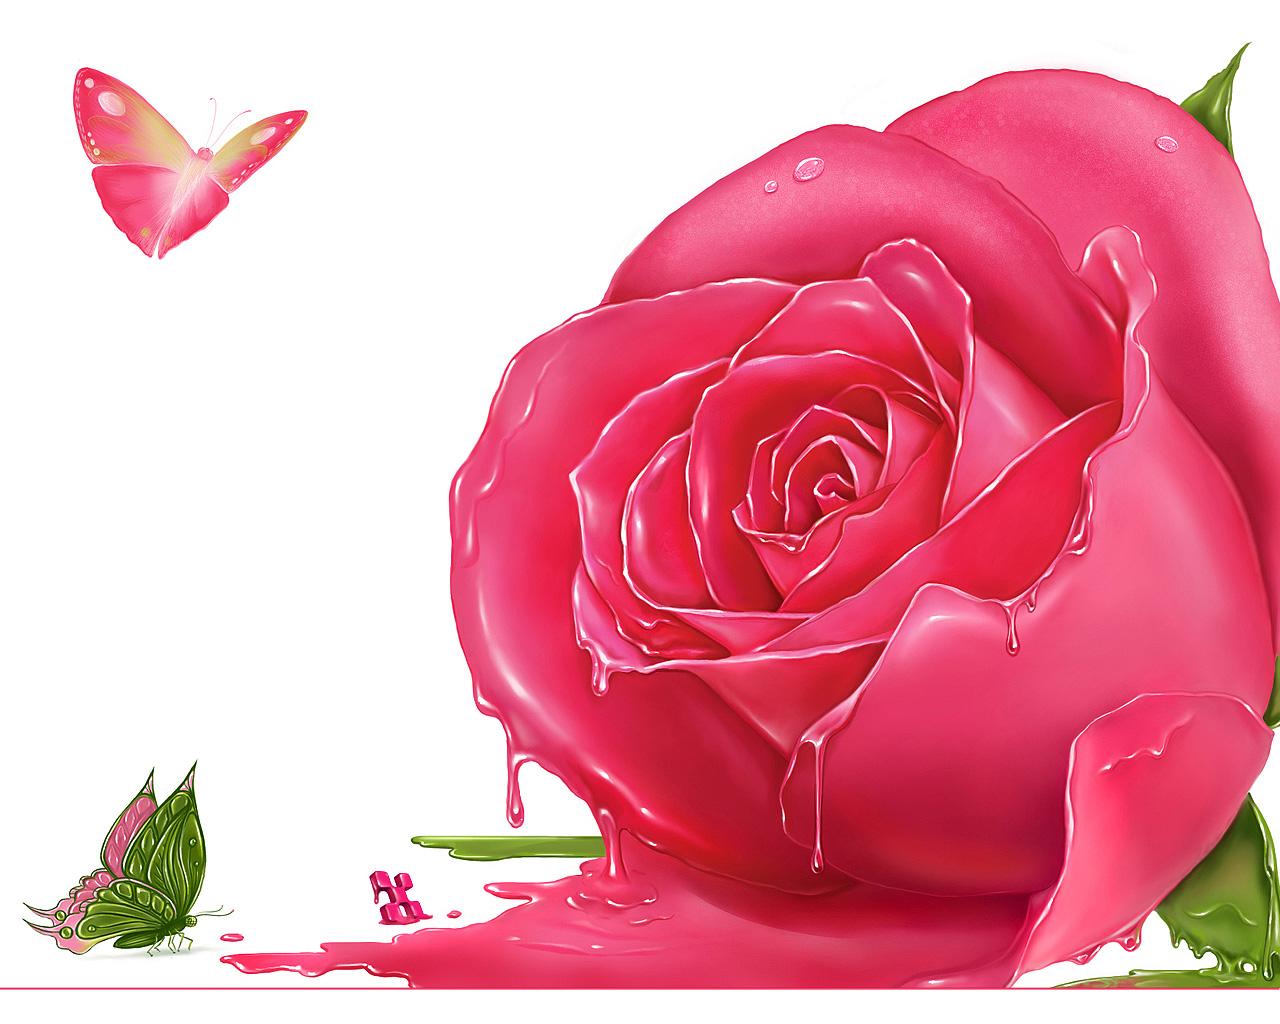  roses background free wallpapers download free download flower